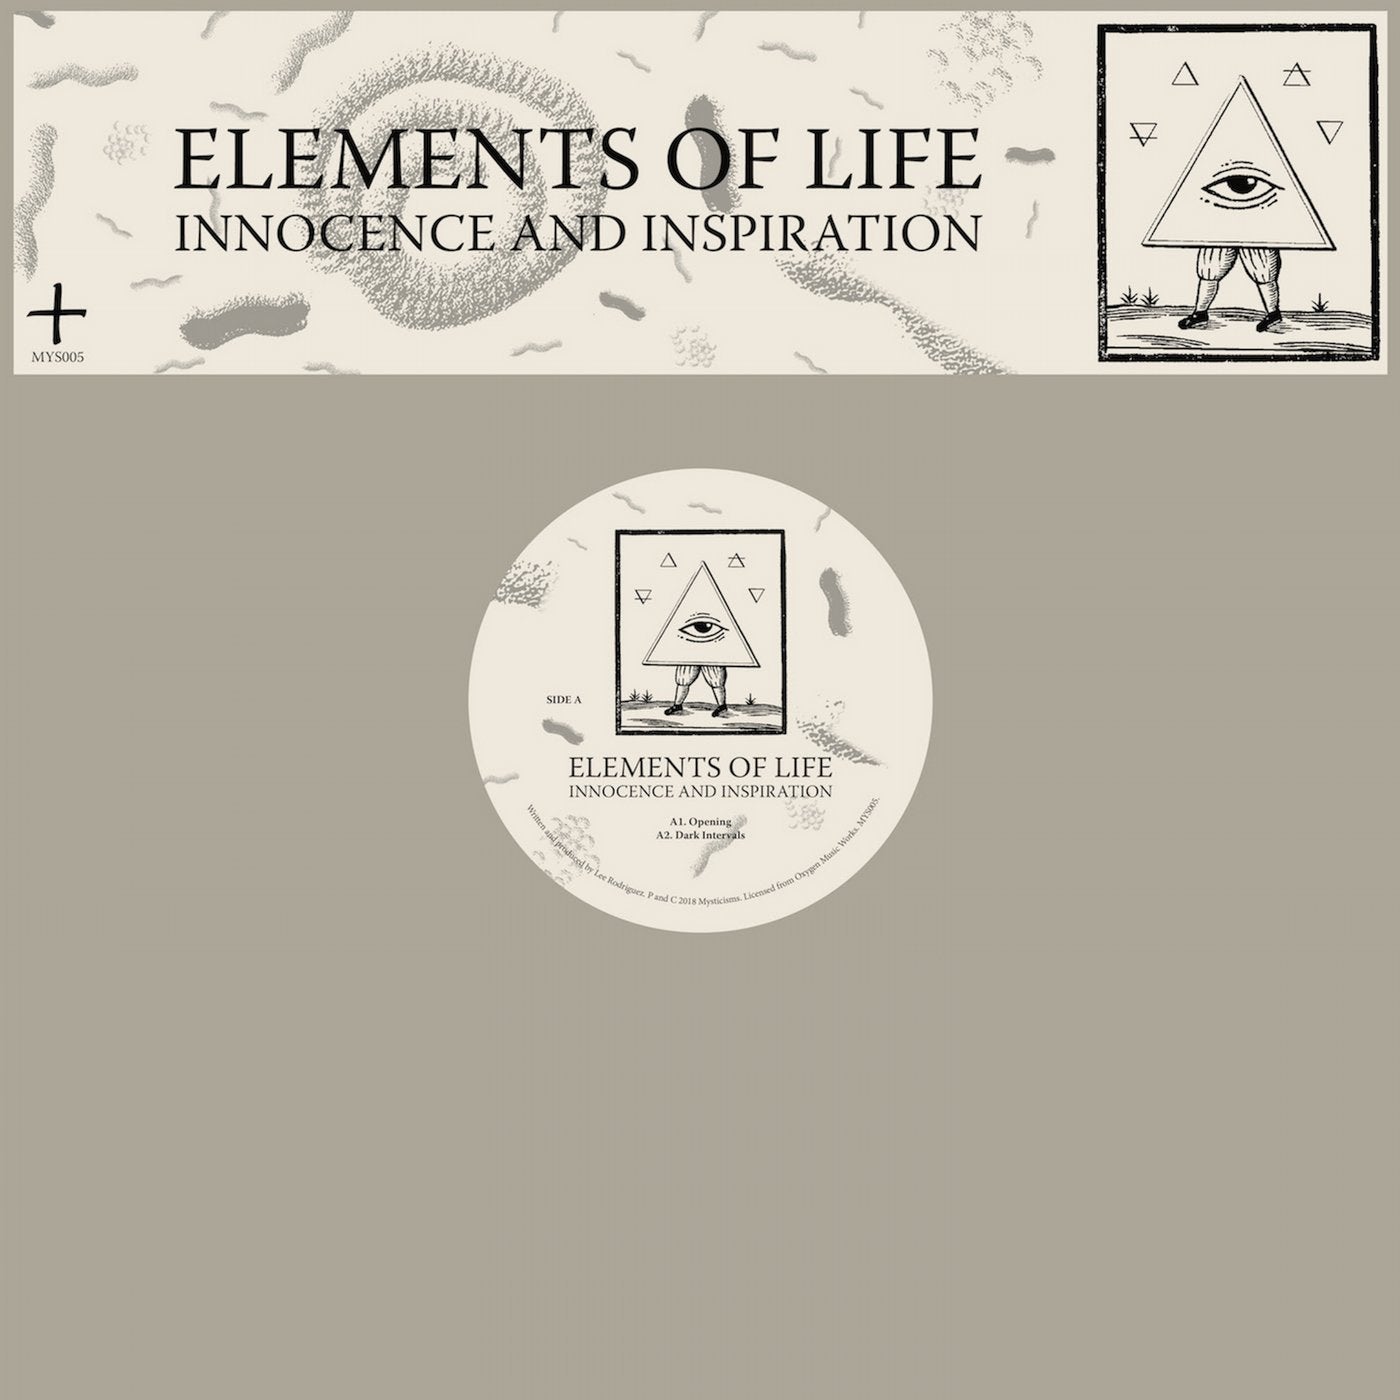 Elements of life. Elements of Life Innocence inspiration. Lives of Innocence.